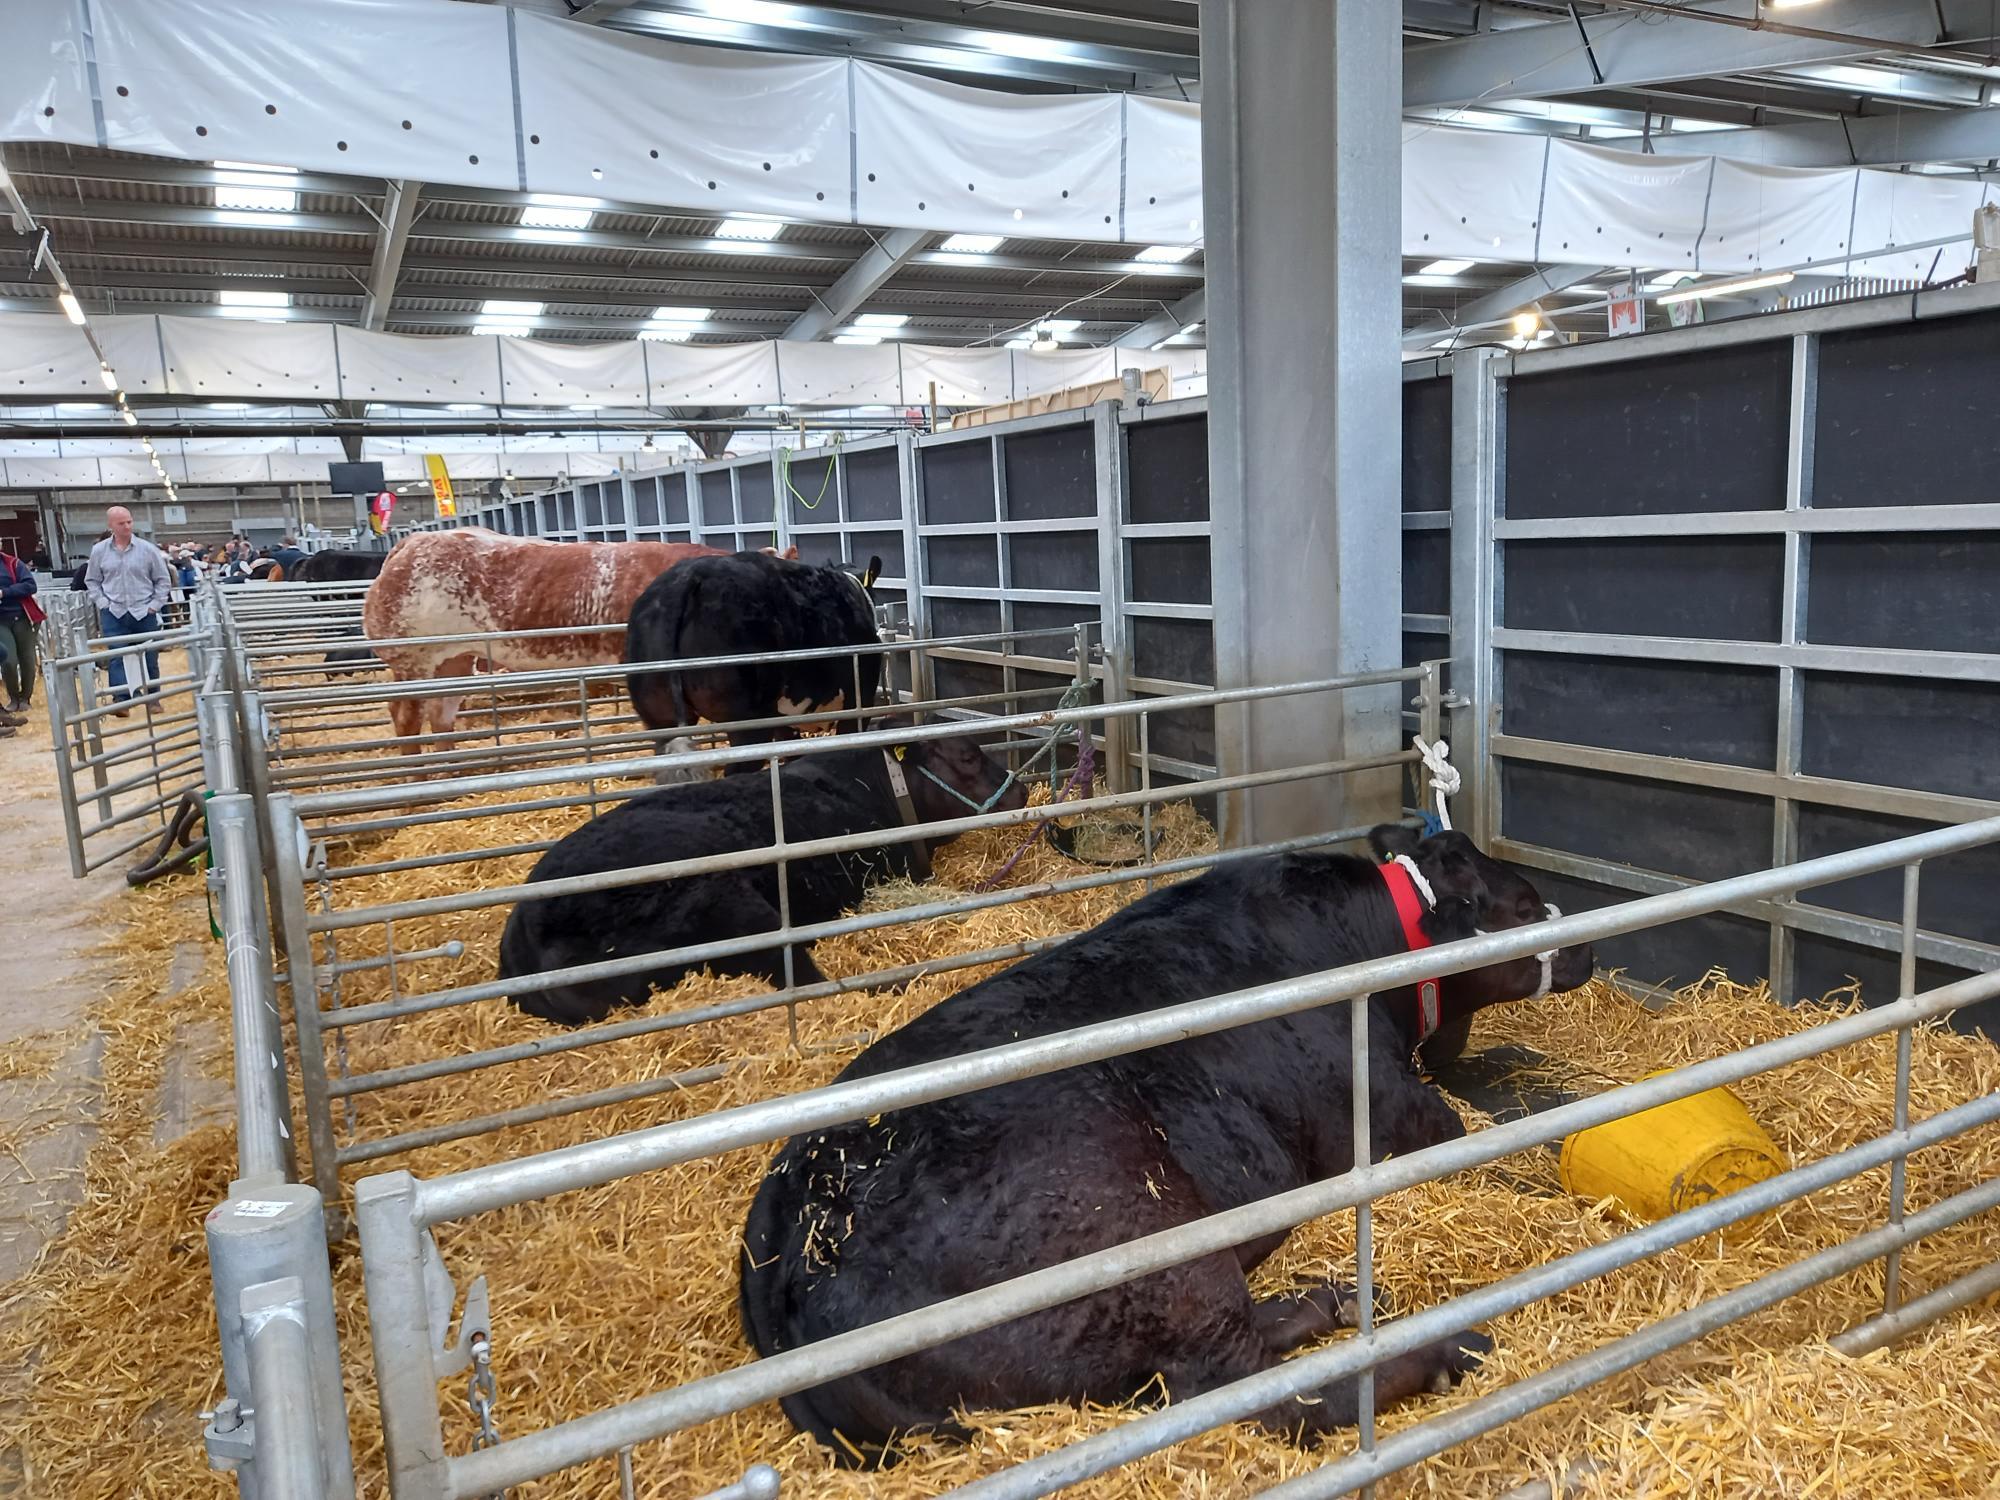 Cattle in the National Commercial Cattle Show